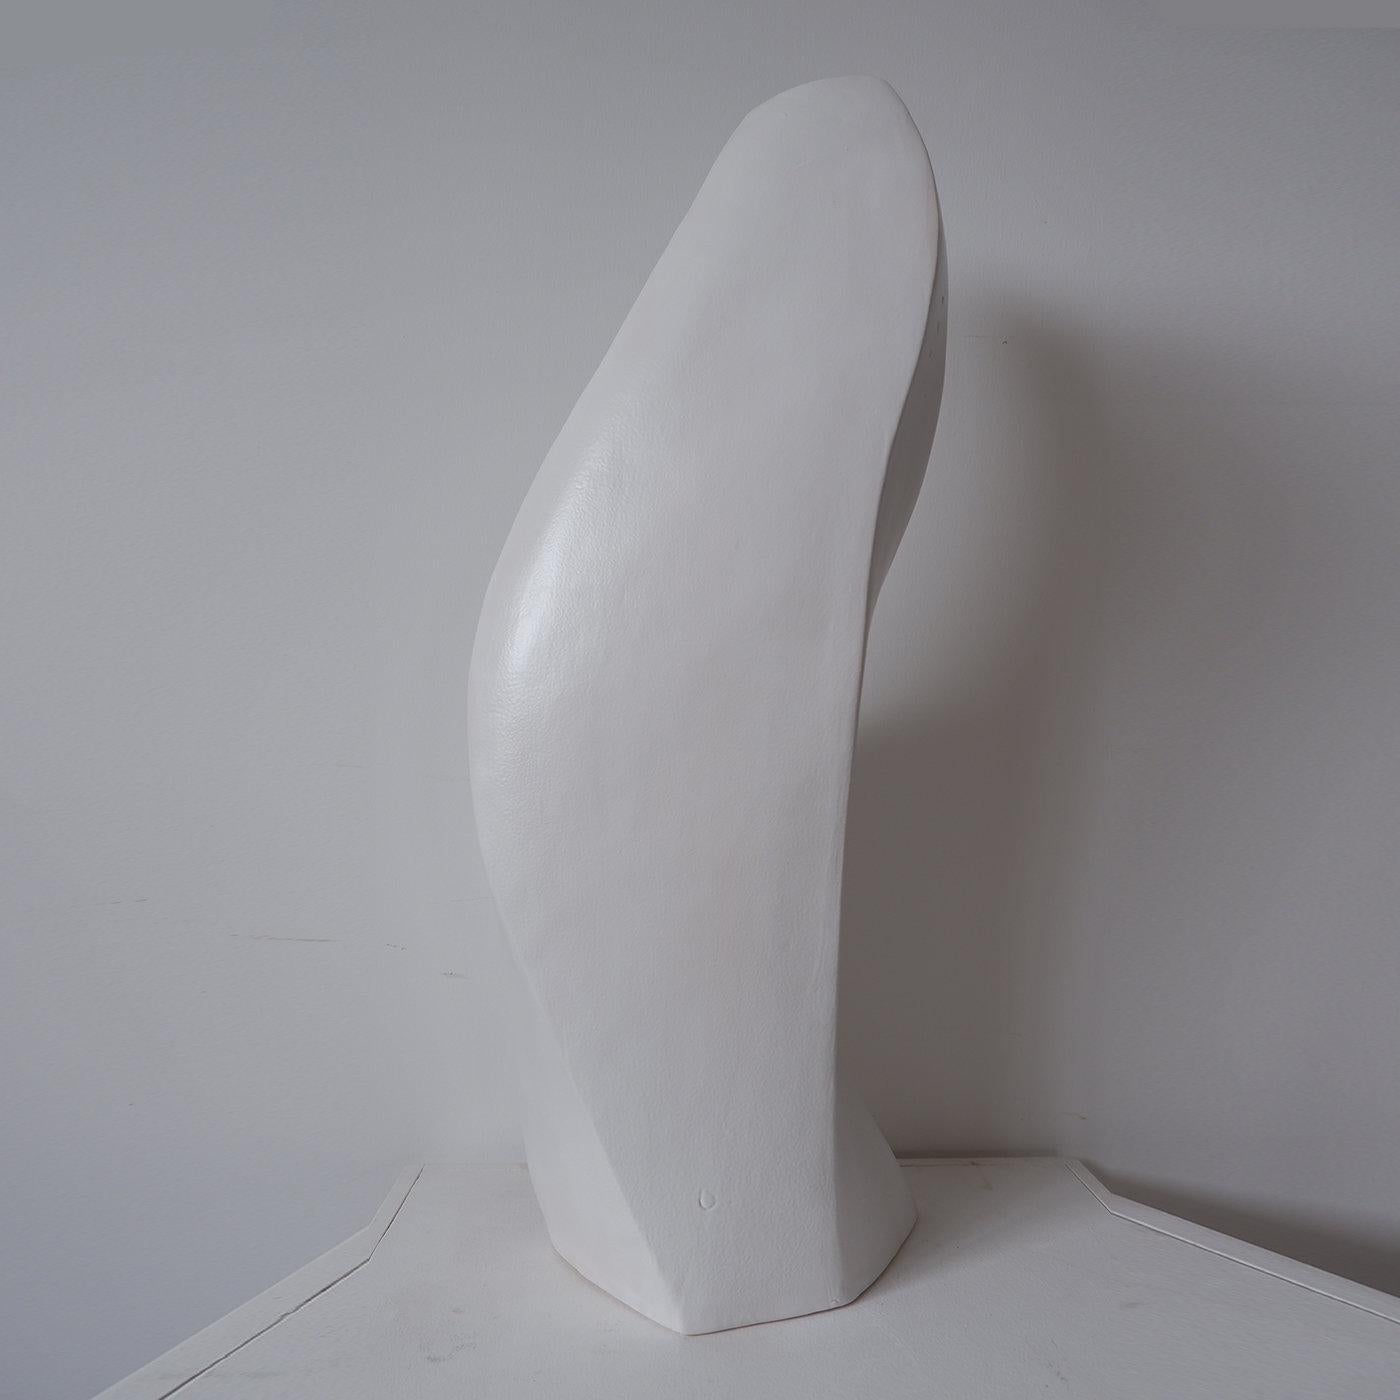 This vase represents the watery womb out of which blossoms the beauty of existence. It is inspired by the Greek goddess Demeter, who rules fertility, the seasons and the cycles of life. Its sleek, white ceramic design features an asymmetric, organic